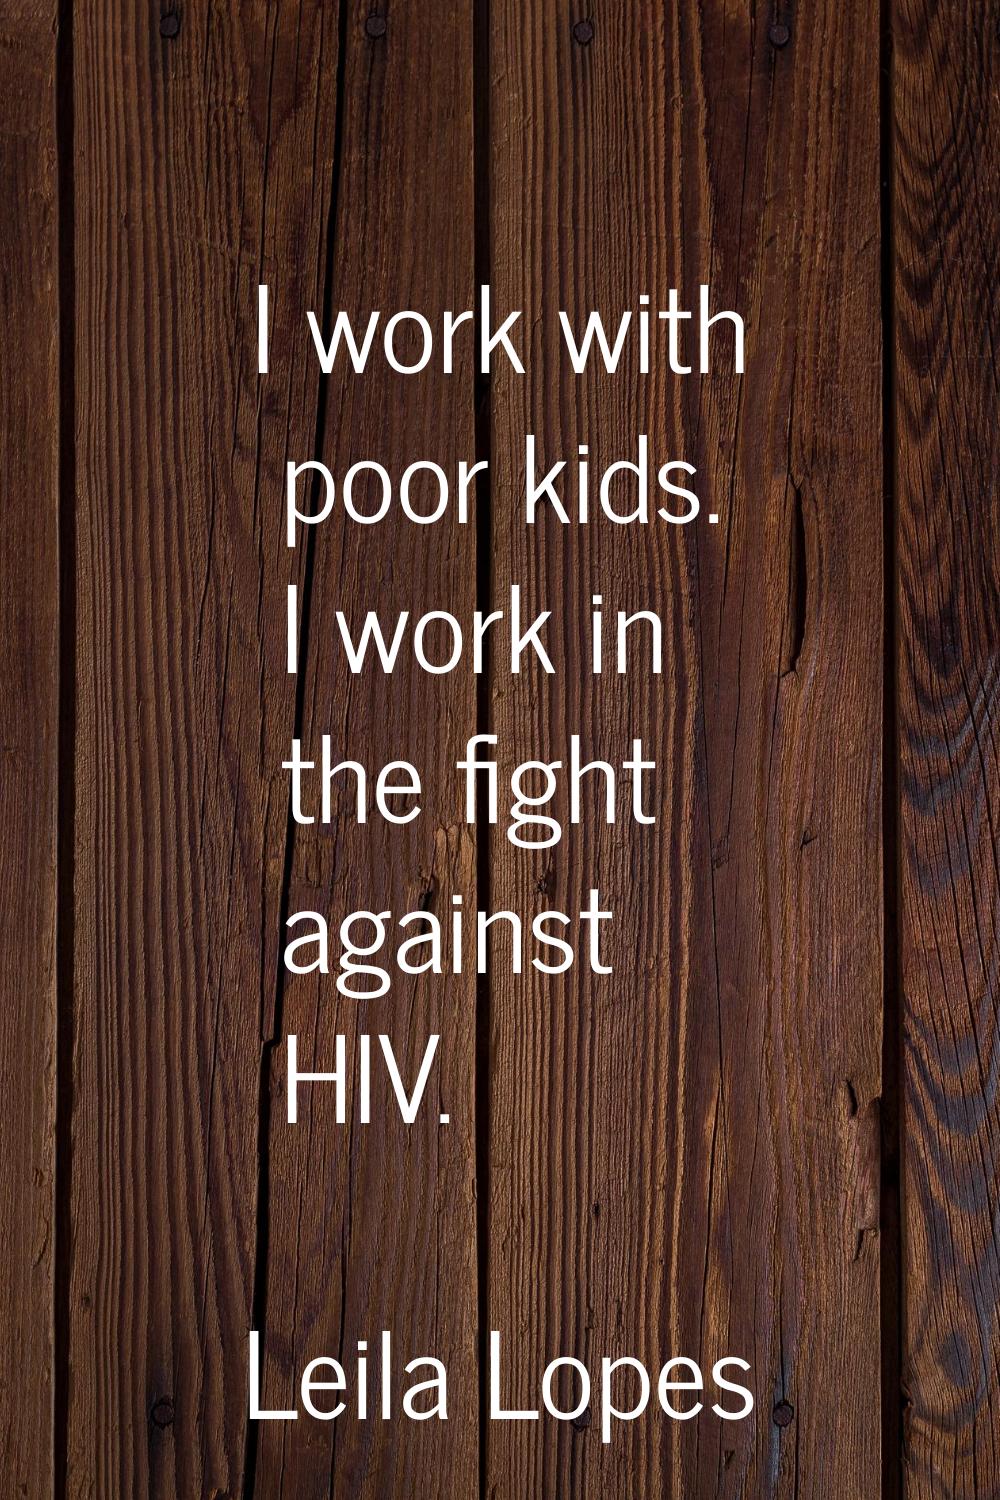 I work with poor kids. I work in the fight against HIV.